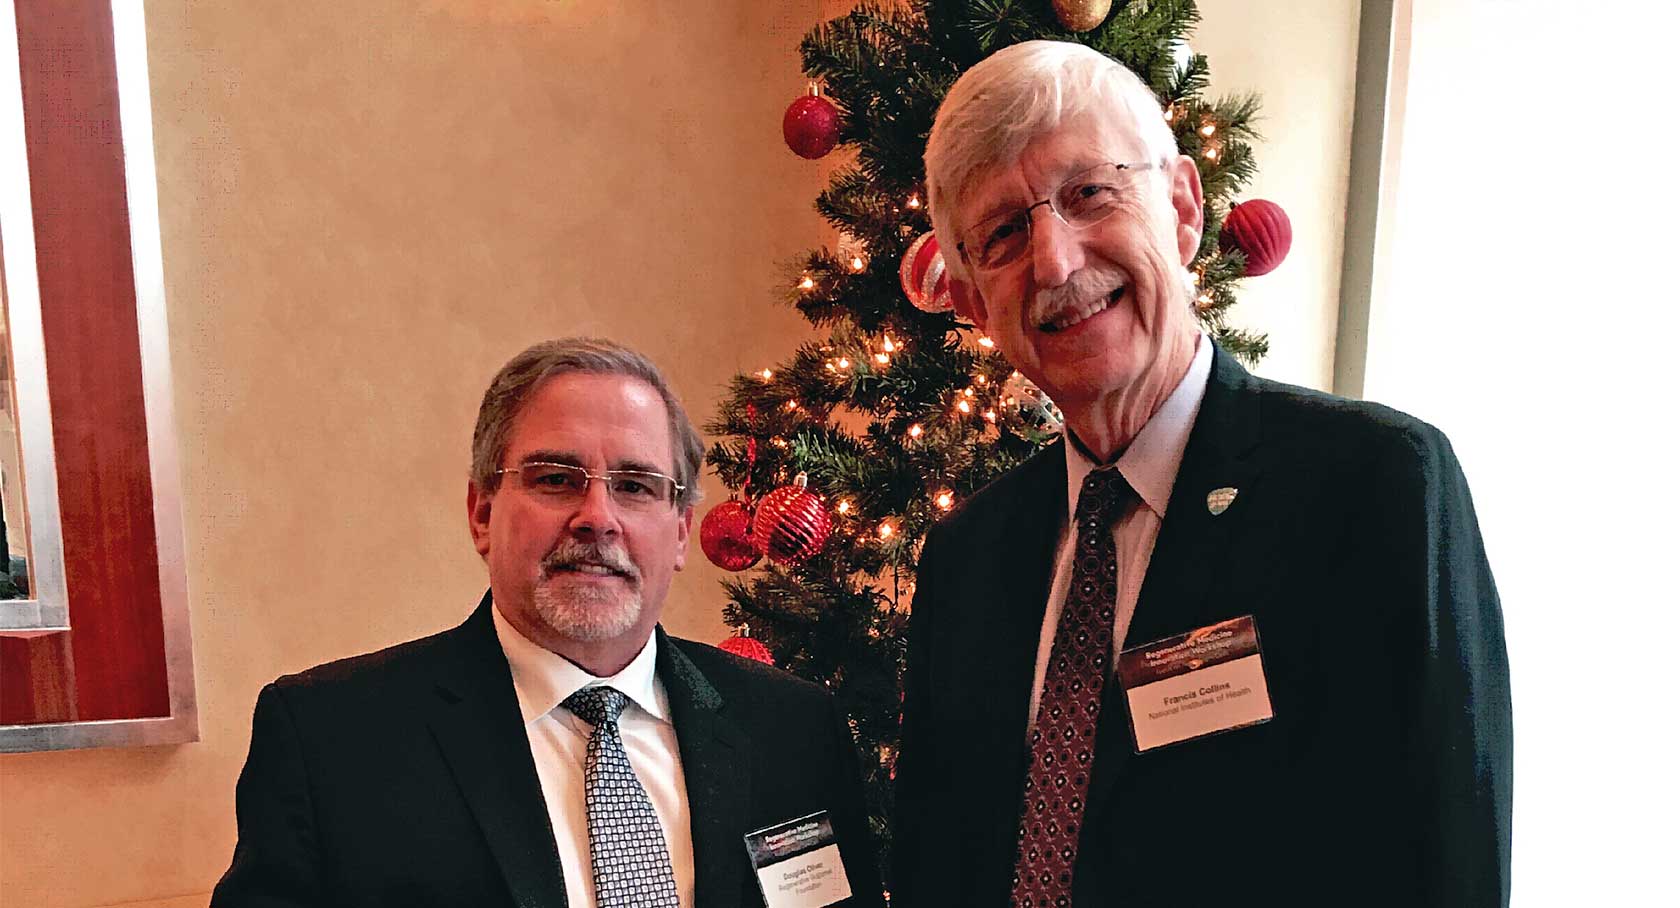 Pioneers of Hope: Patient Advocate Doug Oliver’s Interview of Dr. Francis Collins, Director, National Institutes of Health (NIH)